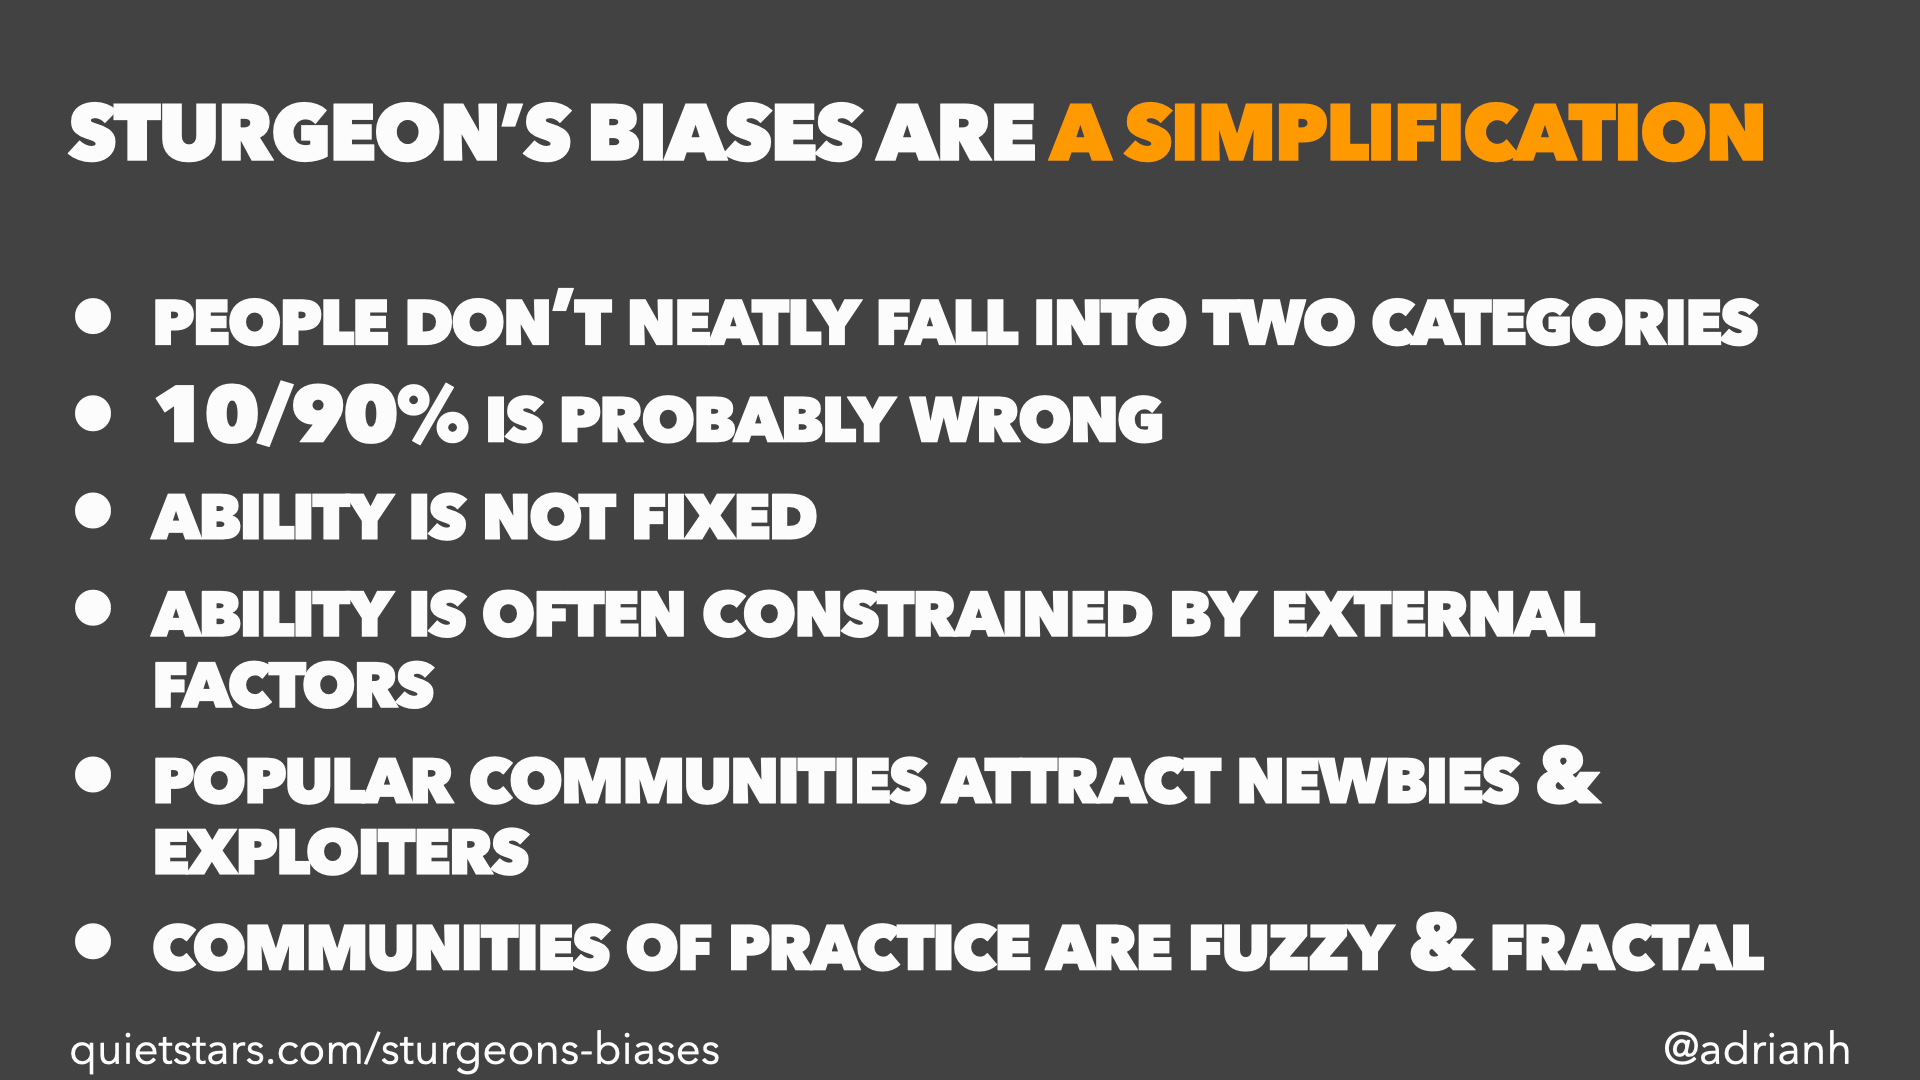 Sturgeon’s Biases are a simplification. People don’t neatly fall into two categories. 10/90% is probably wrong. Ability is not fixed. Ability is often constrained by external factors. Popular communities attract newbies & exploiters. Communities of practice are fuzzy & fractal.